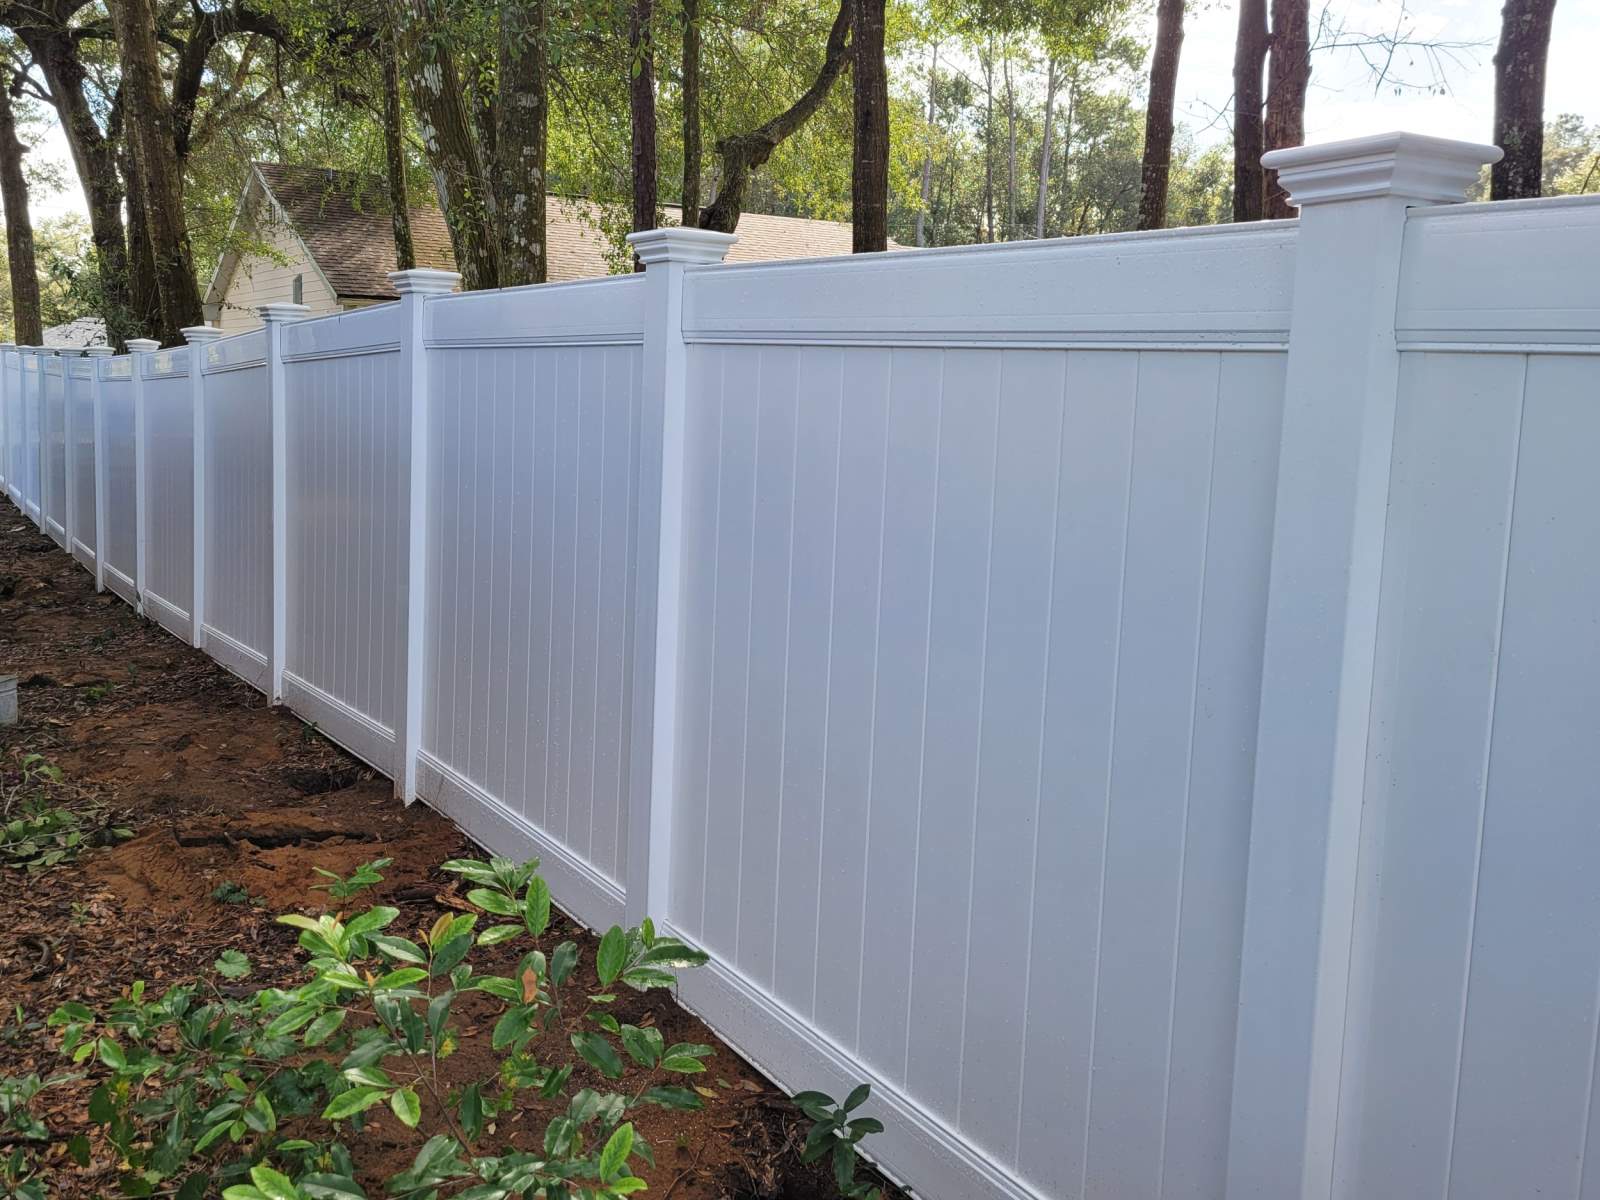 Vinyl fence solutions for the Ocala, Florida area